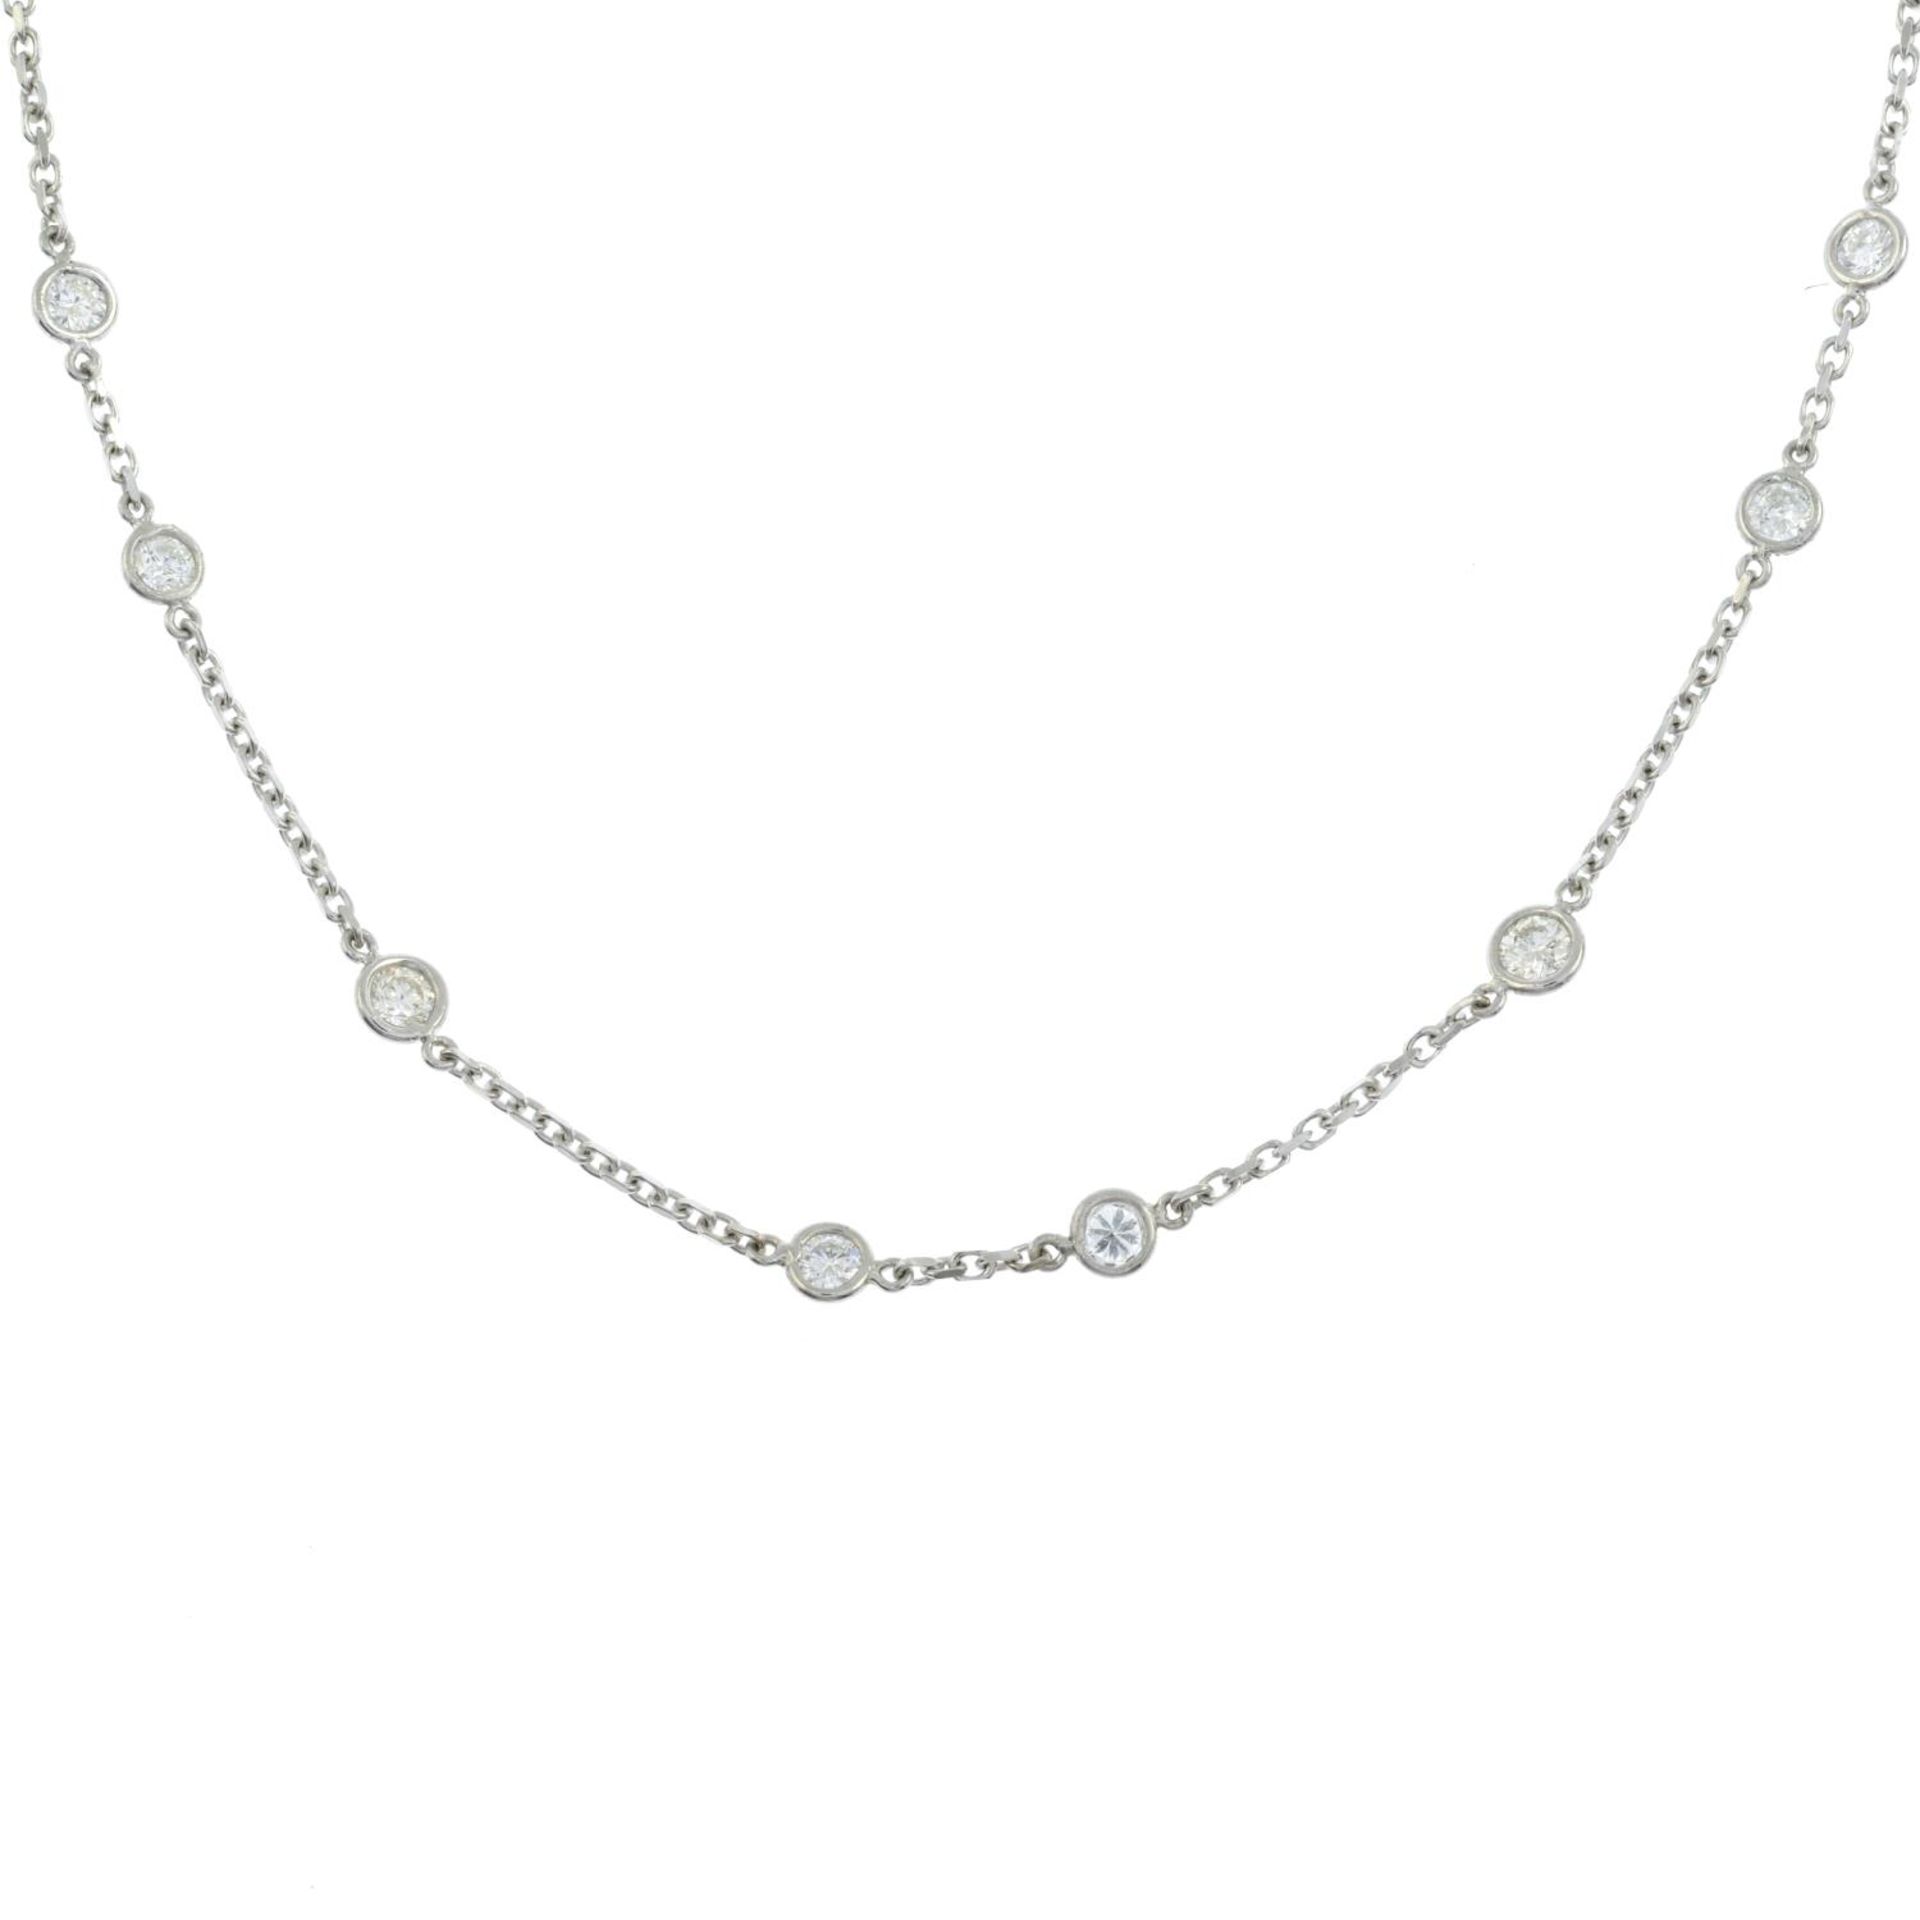 An 18ct gold brilliant-cut diamond necklace.Estimated total diamond weight 0.60ct.Hallmarks for